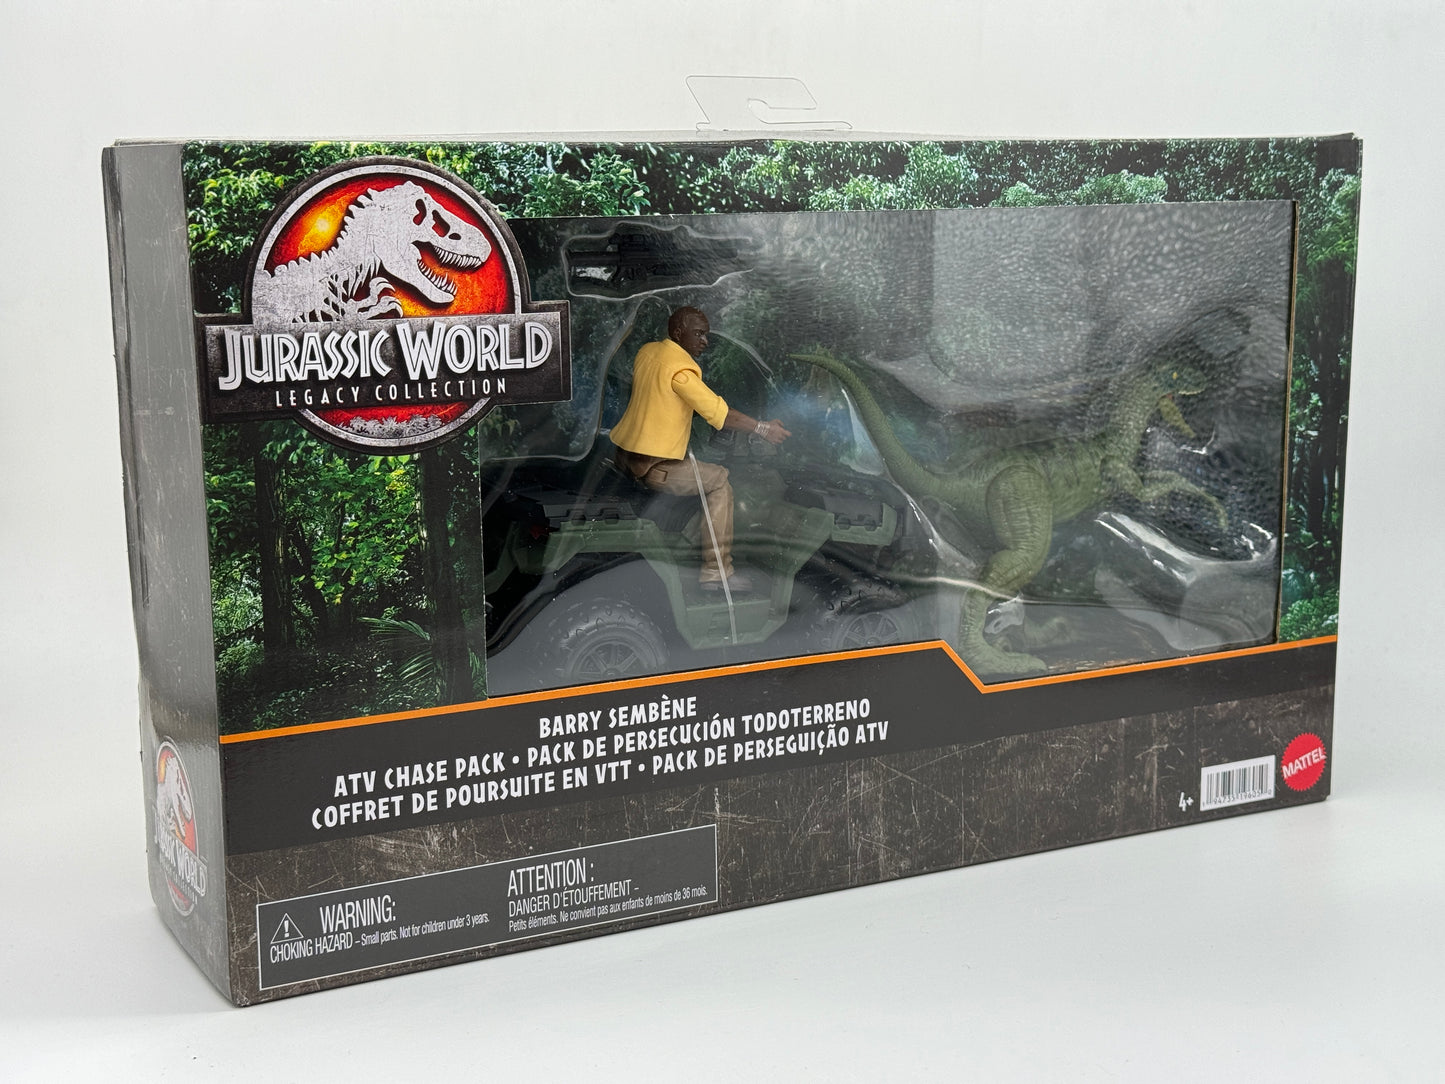 Jurassic World Legacy Collection "Barry Sembène ATV Chase Pack" Mattel US (2023)